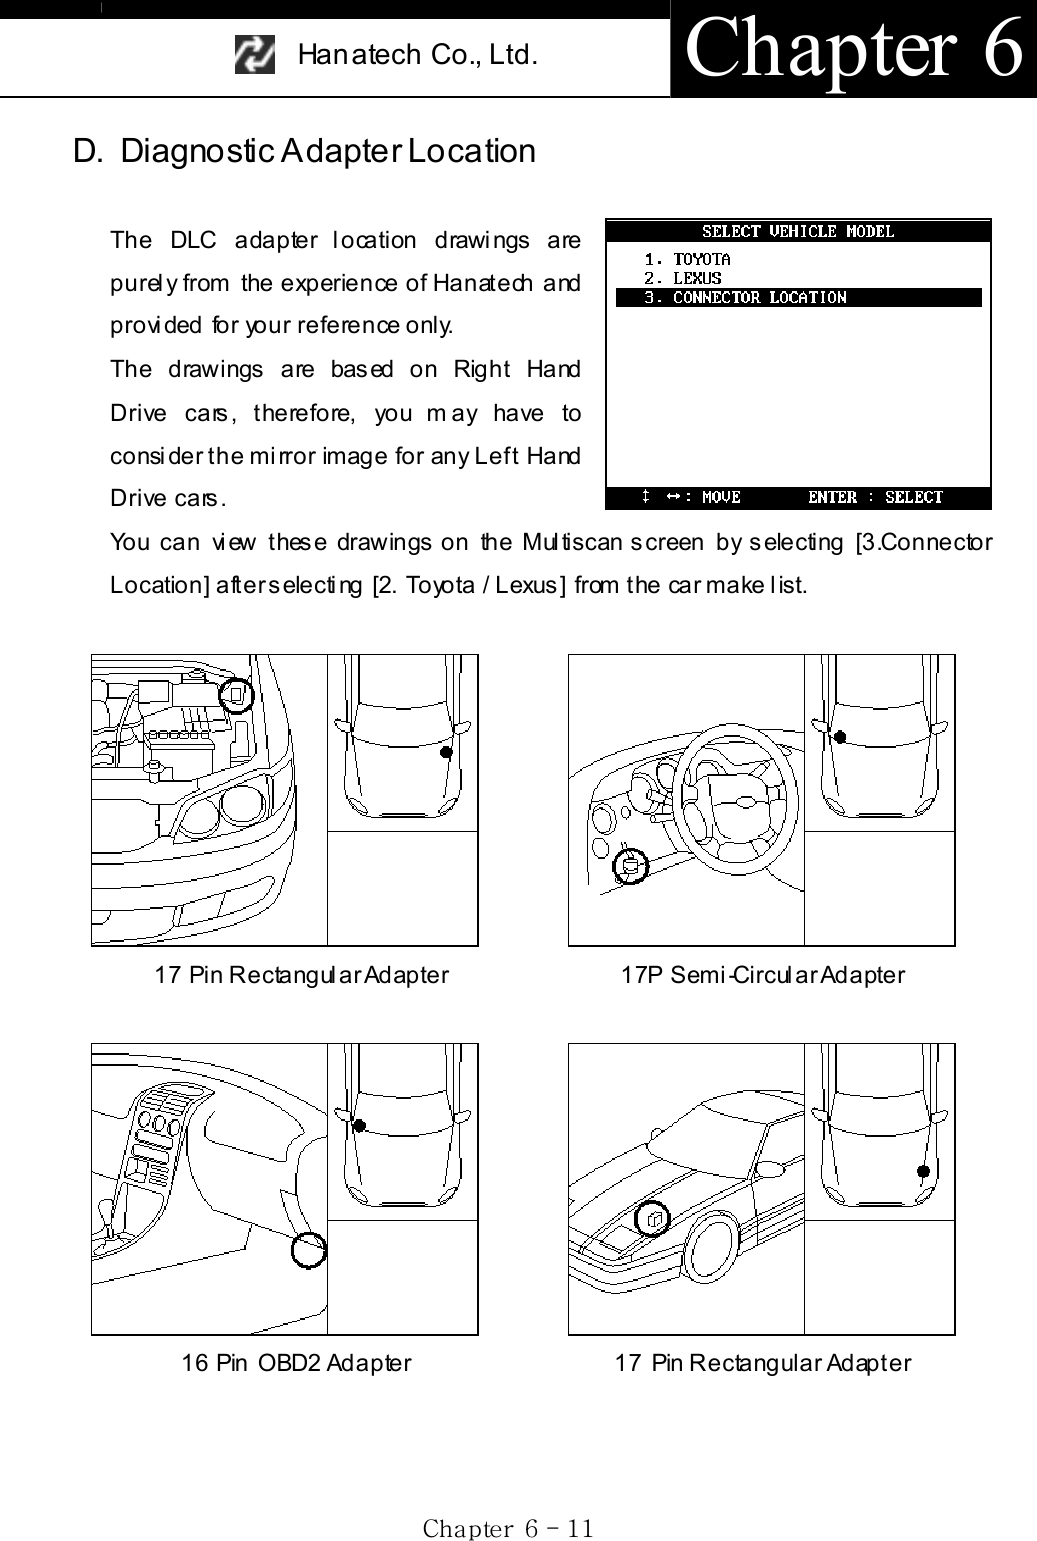 Han atech Co., Ltd.  Chapter 6 Gj G]G TGXXGD. Diagnostic Adapter Location The DLC adapter location drawings are purely from the experience of Hanatech and provided for your reference only. The drawings are based on Right Hand Drive cars, therefore, you m ay have to consider the mirror image for any Left Hand Drive cars.     You can view these drawings on the Multiscan screen by selecting [3.Connector Location] after selecting [2. Toyota / Lexus] from the car make list.    17 Pin Rectangular Adapter 16 Pin OBD2 Adapter   17P Semi-Circular Adapter 17 Pin Rectangular Adapter 